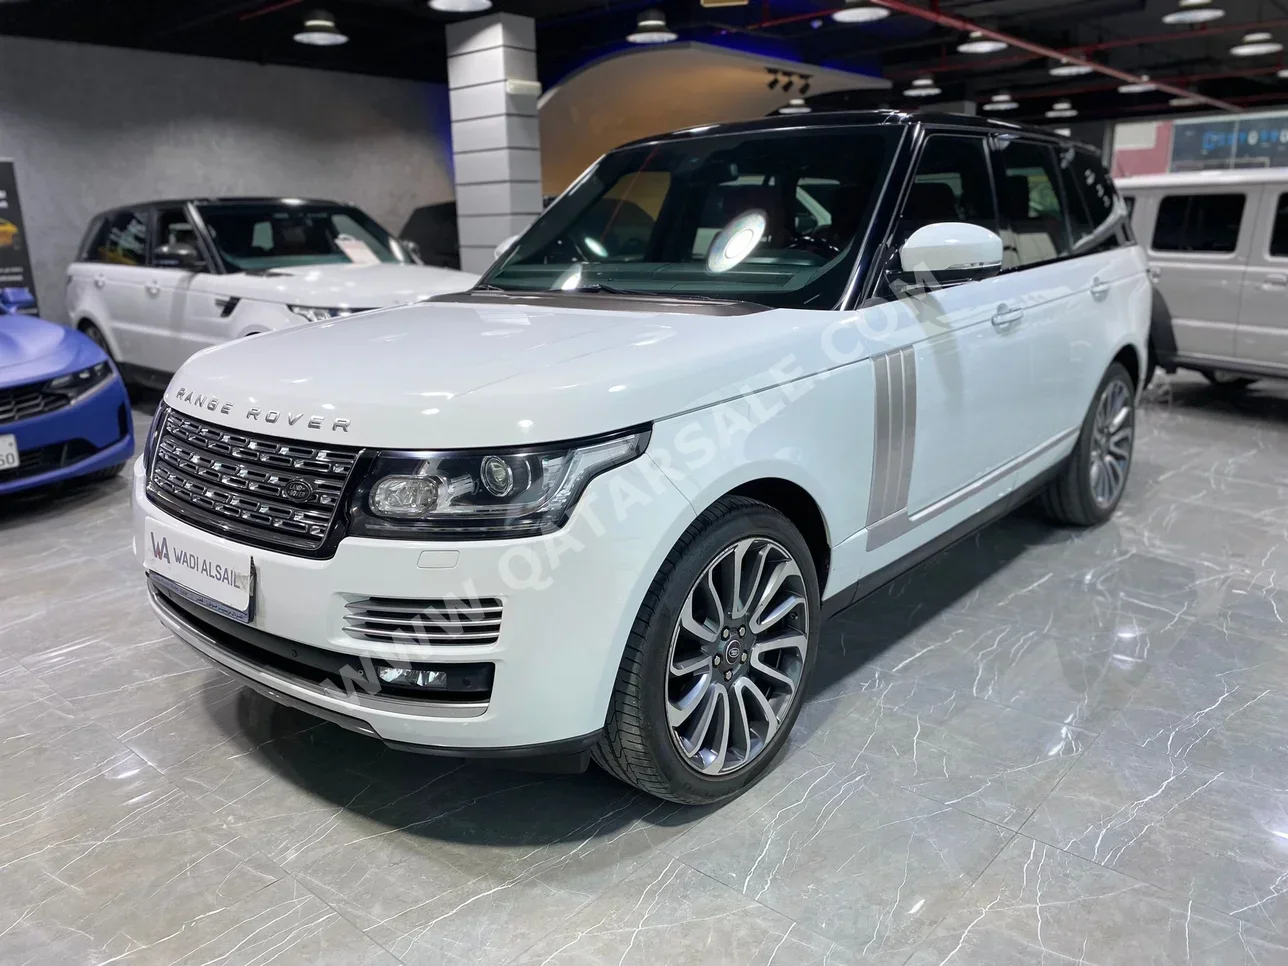 Land Rover  Range Rover  Vogue  Autobiography  2015  Automatic  92,000 Km  8 Cylinder  Four Wheel Drive (4WD)  SUV  White